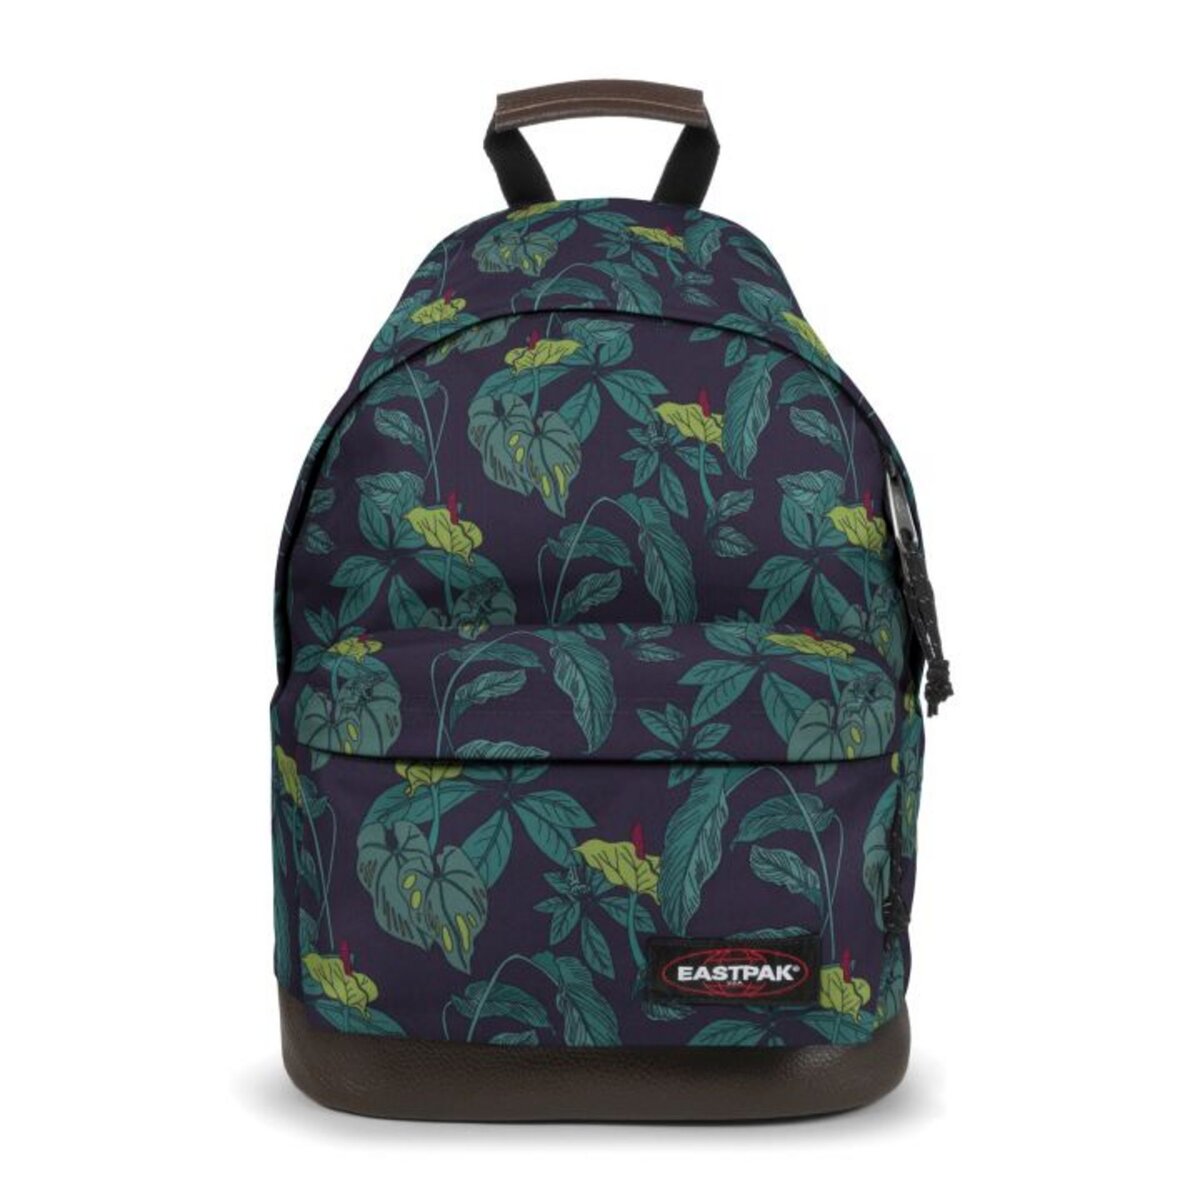 EASTPAK Sac à dos WYOMING wild green 1 compartiment